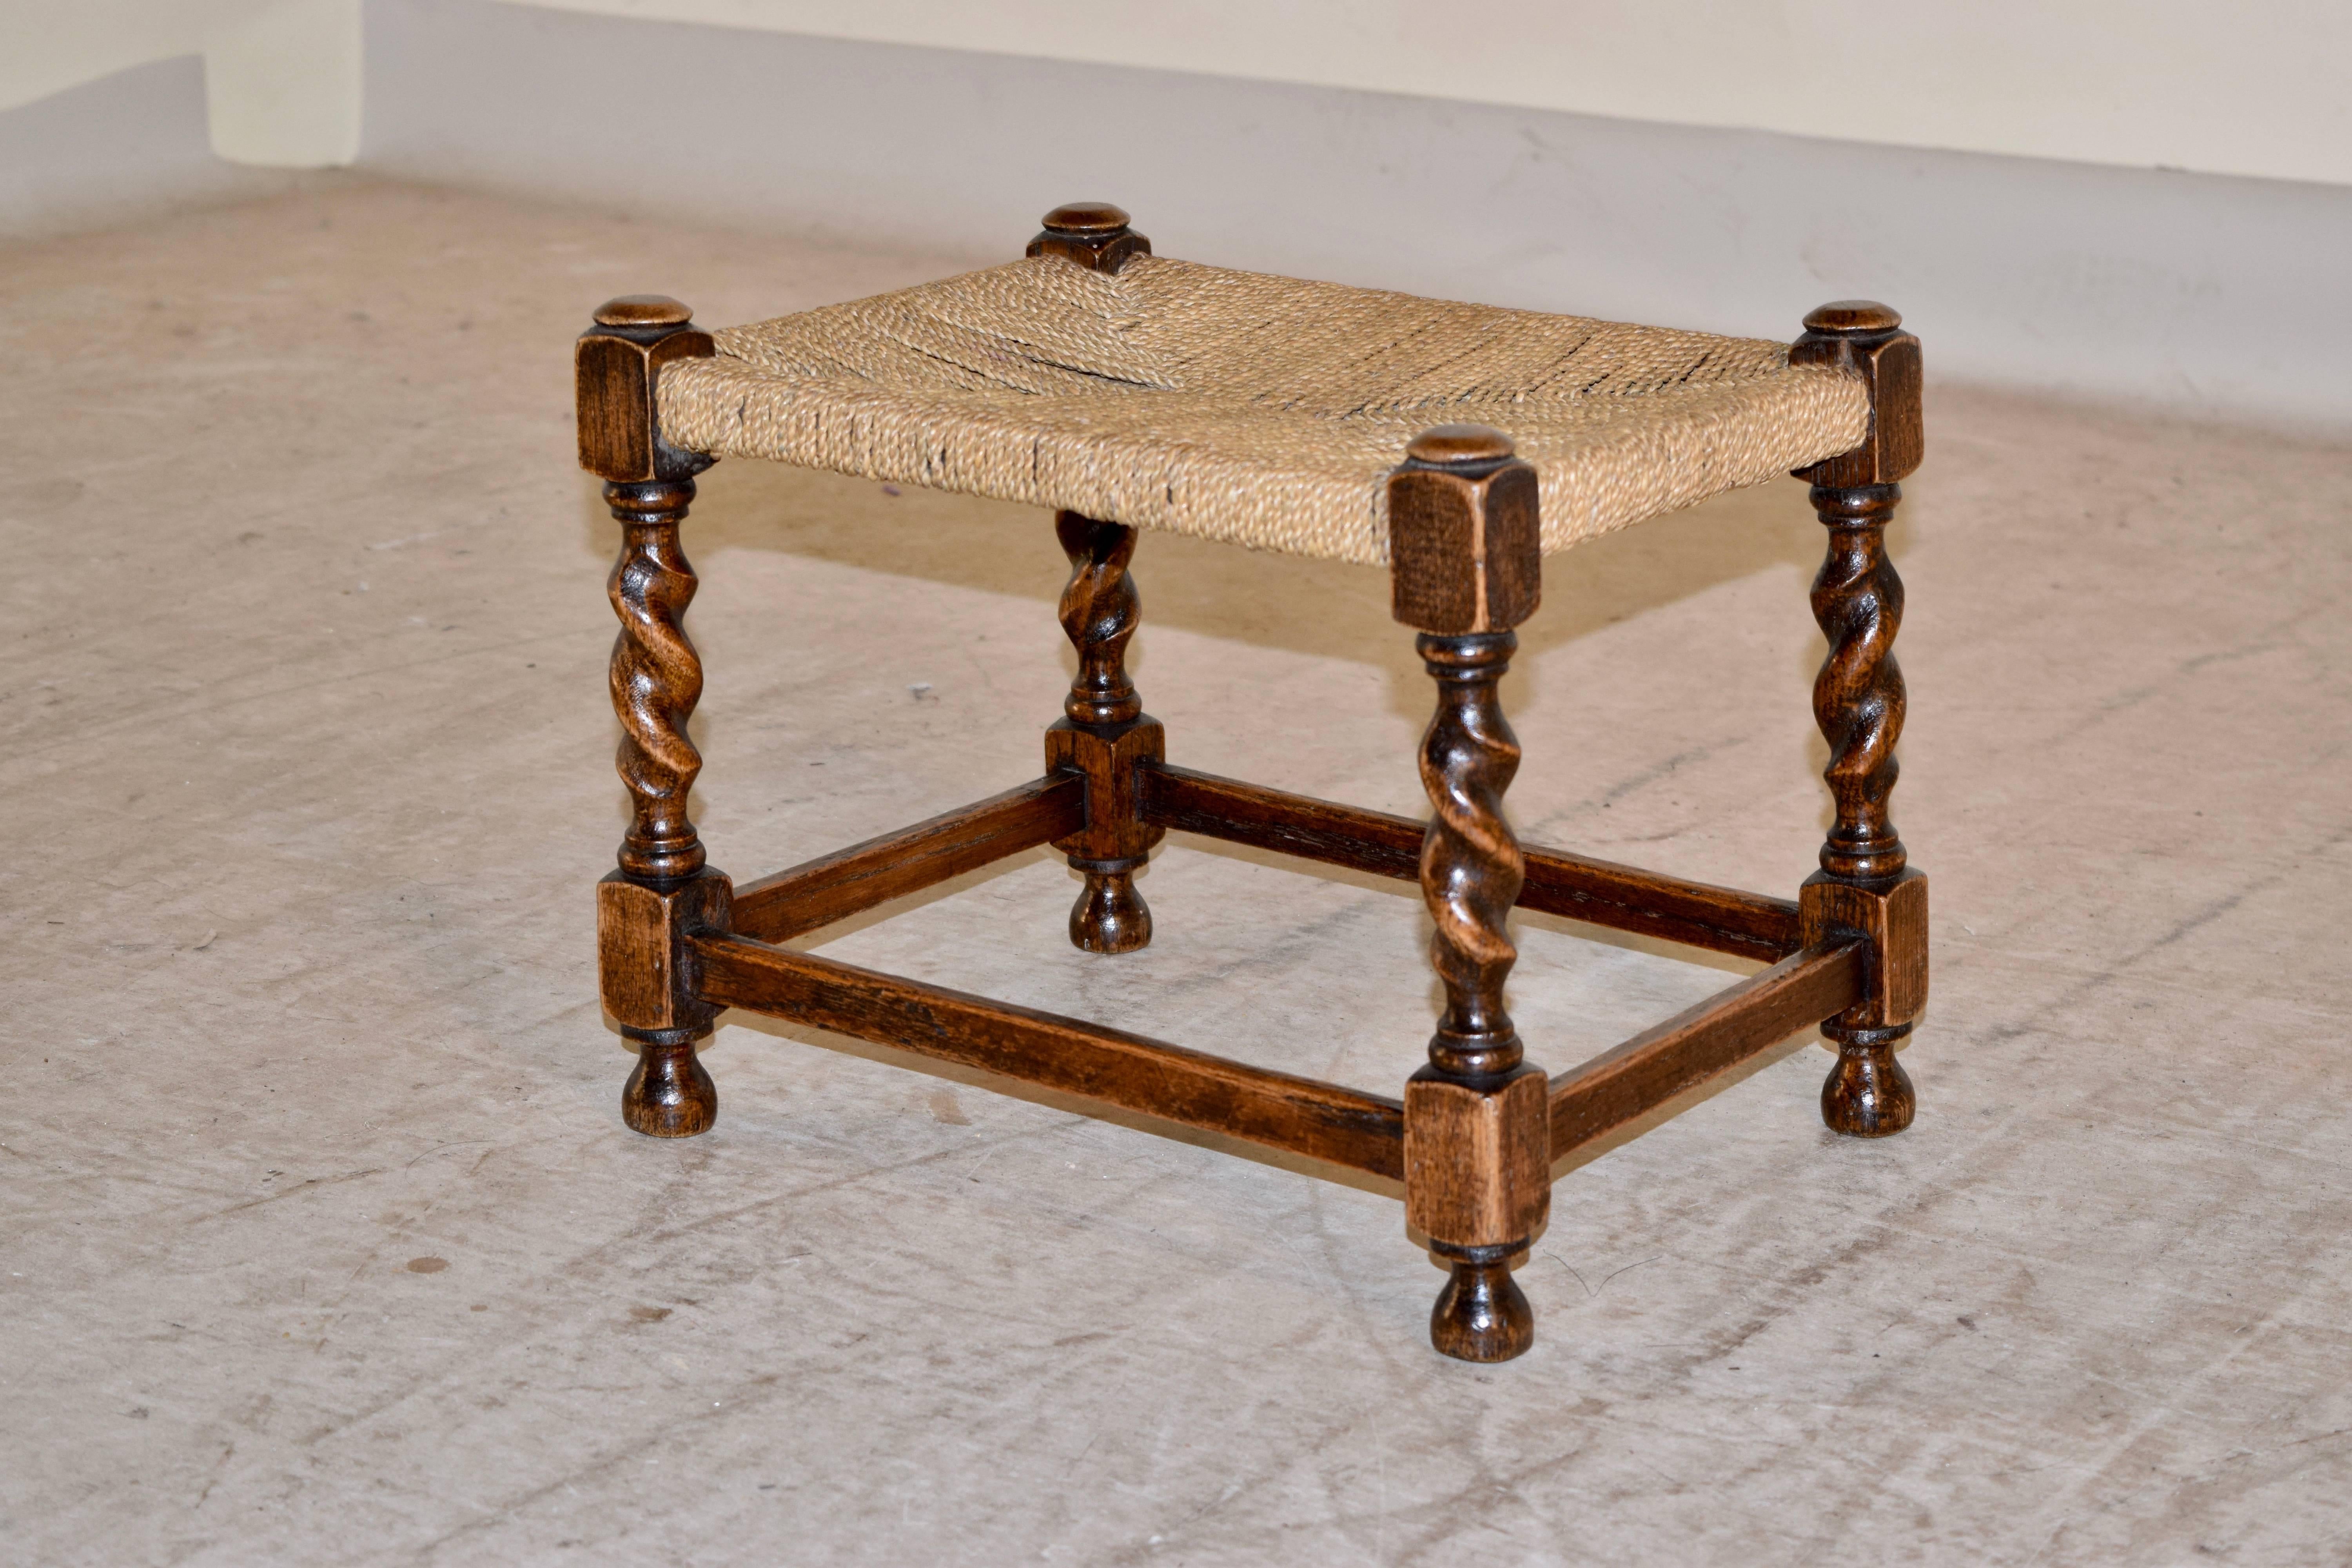 19th century small oak stool from England with a woven rush top following down to hand-turned barley twist legs, joined by simple stretchers and raised on turned feet.